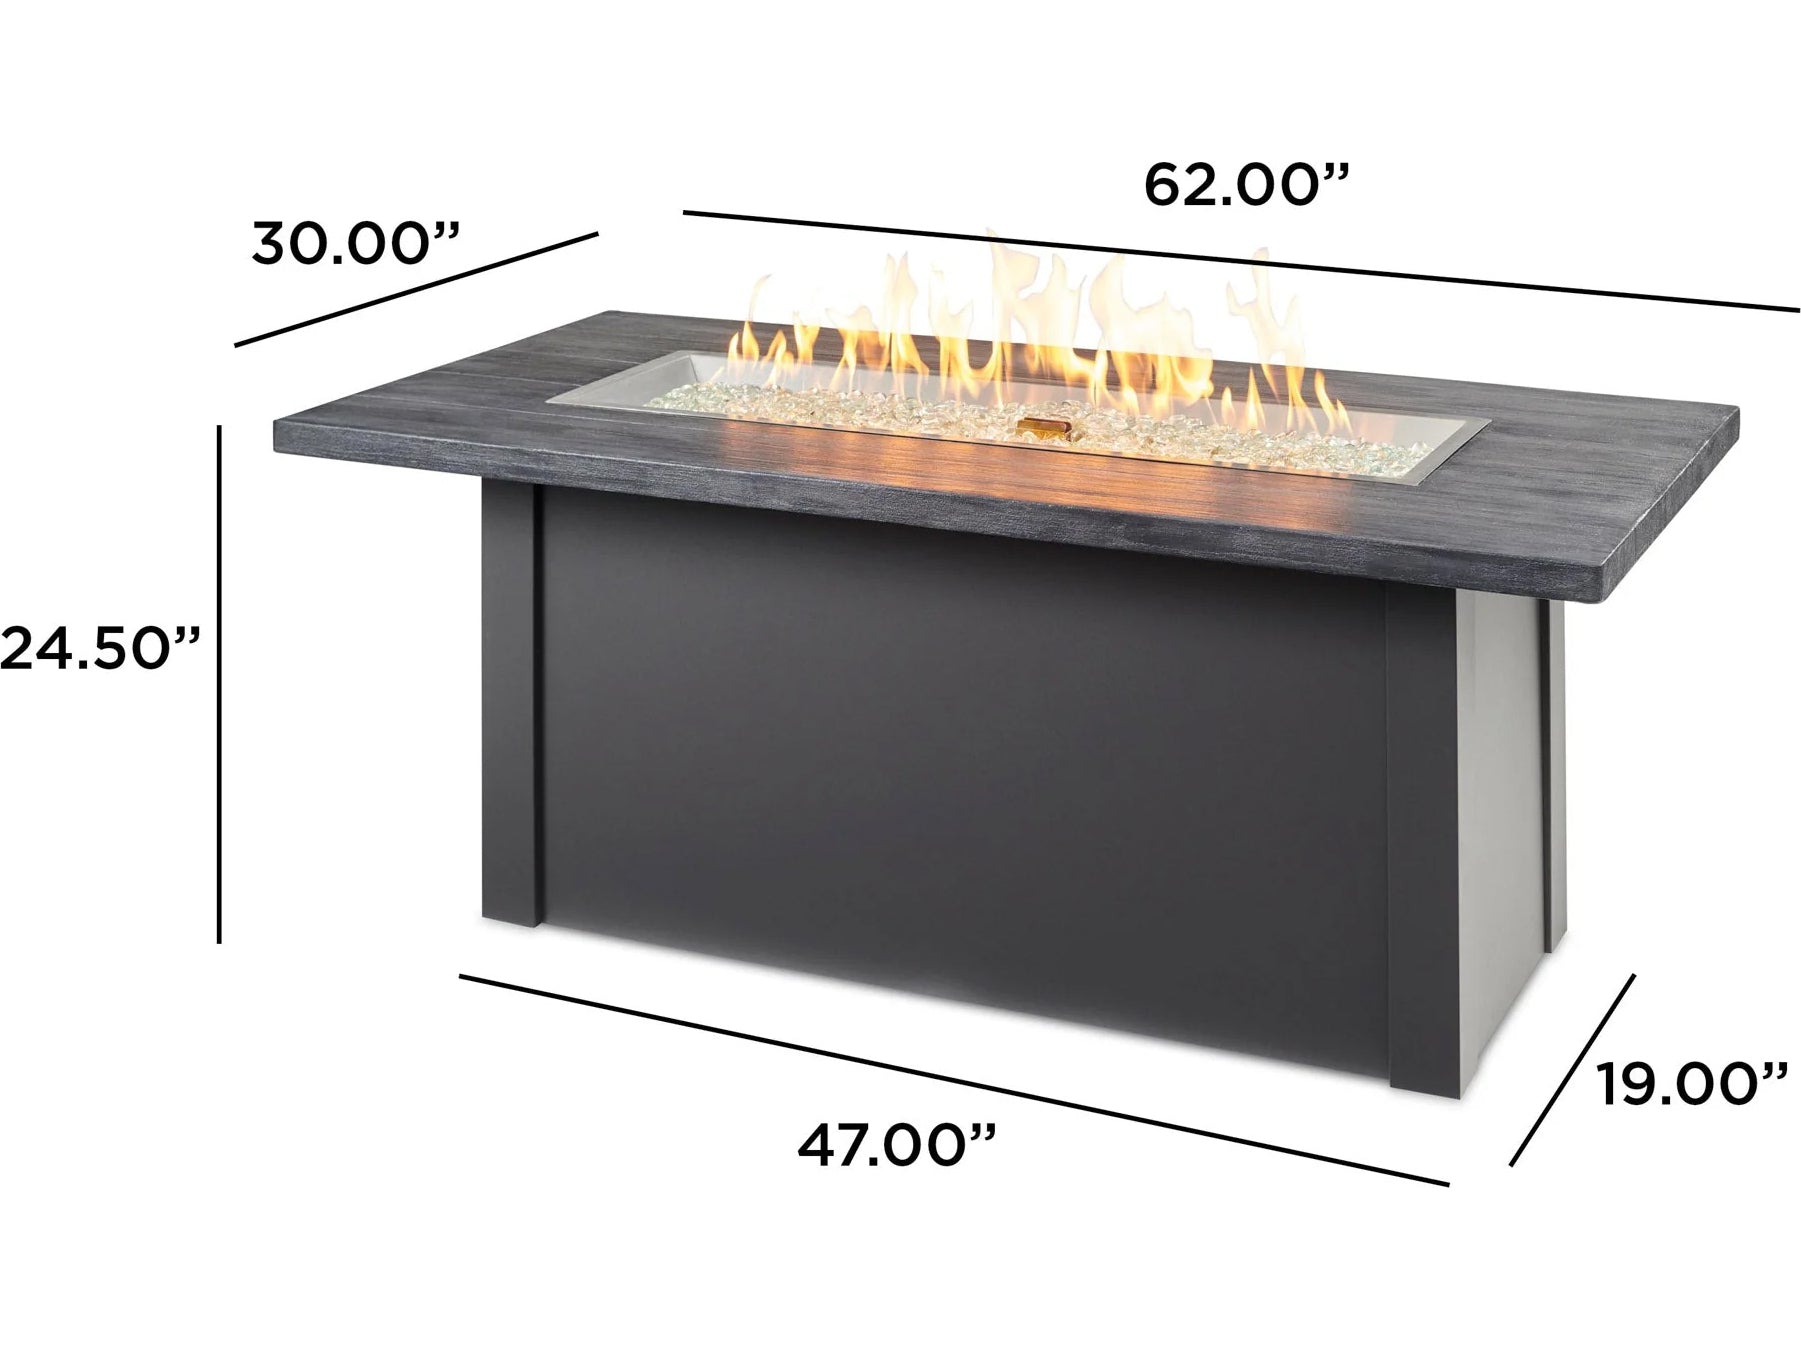 Outdoor Greatroom - 44’‘W x 30’'D - Havenwood Steel Graphite Grey Rectangular Carbon Grey Everblend Top Gas Fire Pit Table